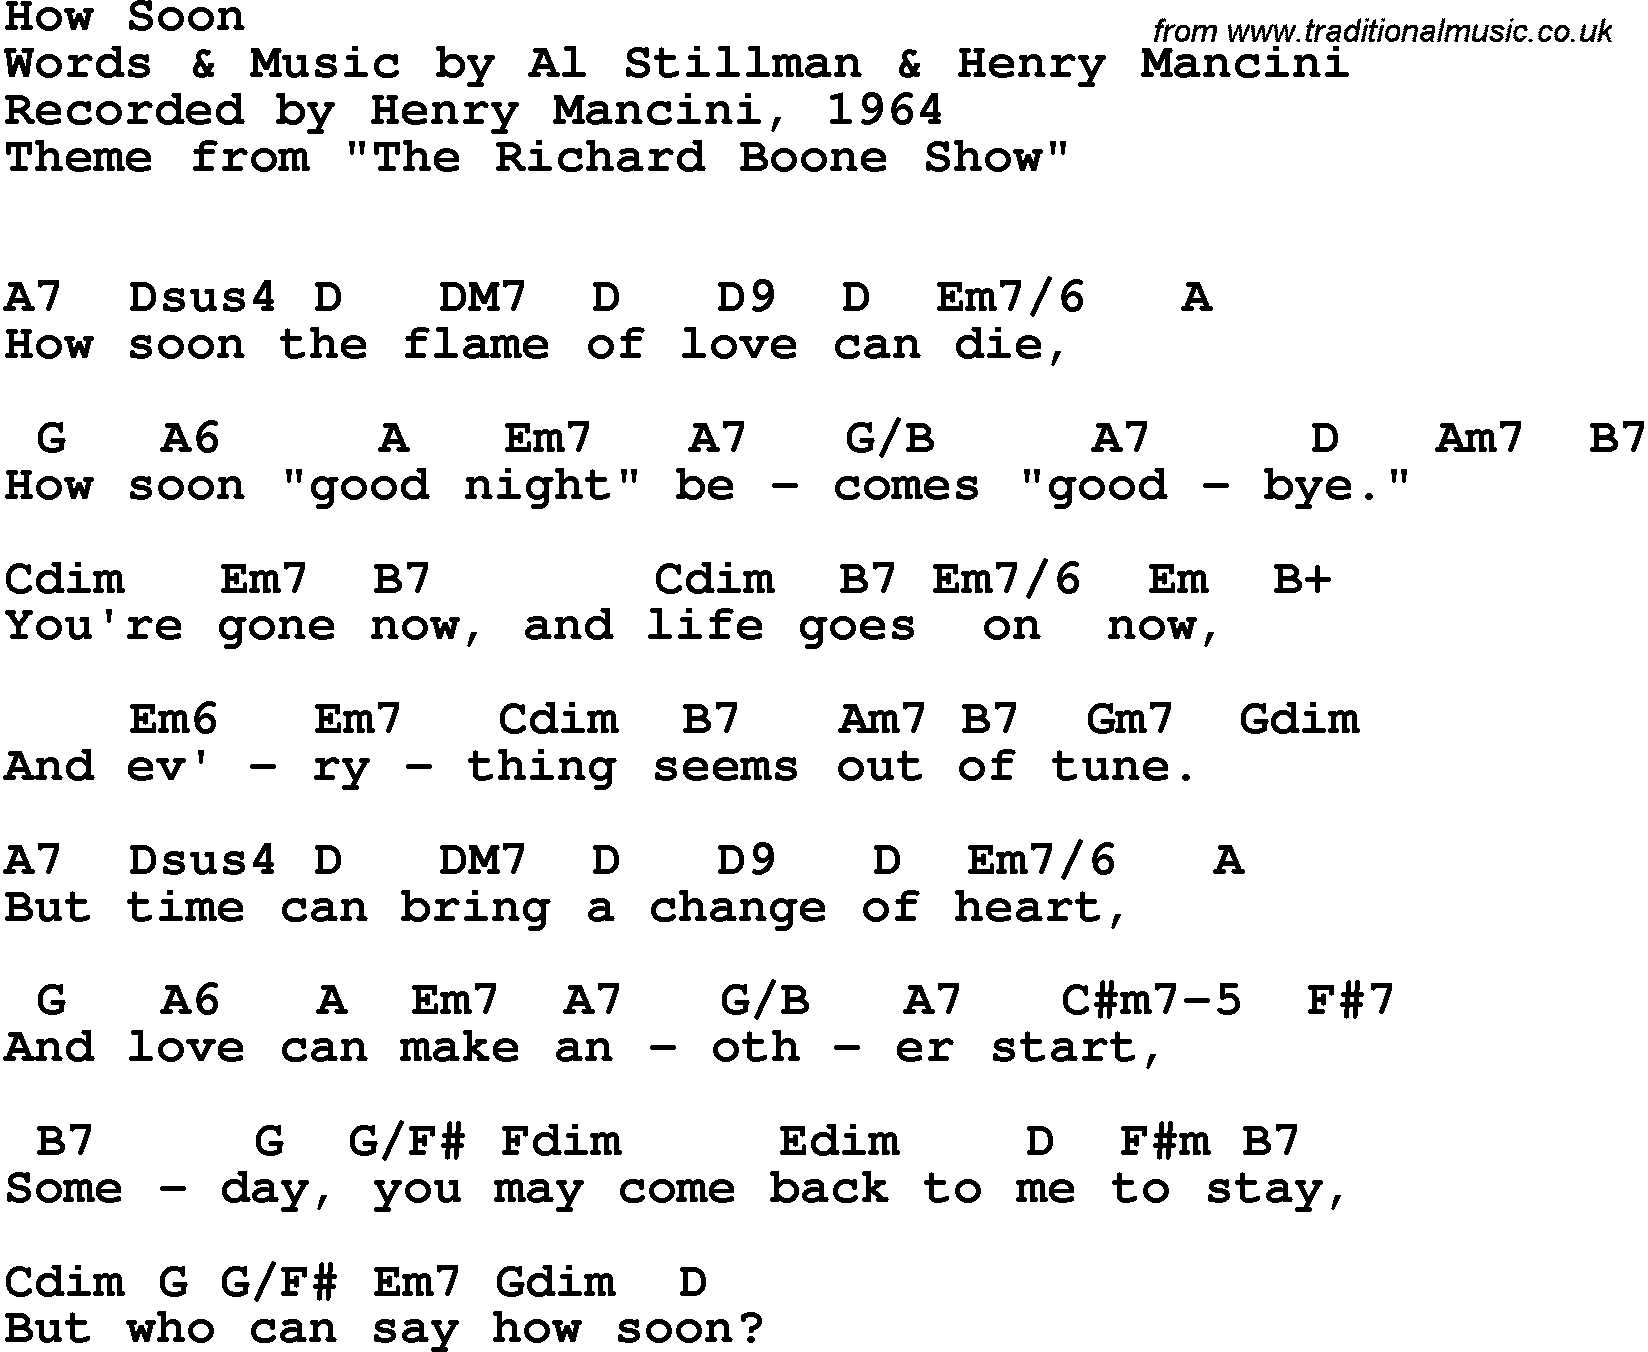 Song Lyrics With Guitar Chords For How Soon Henry Mancini 1964 